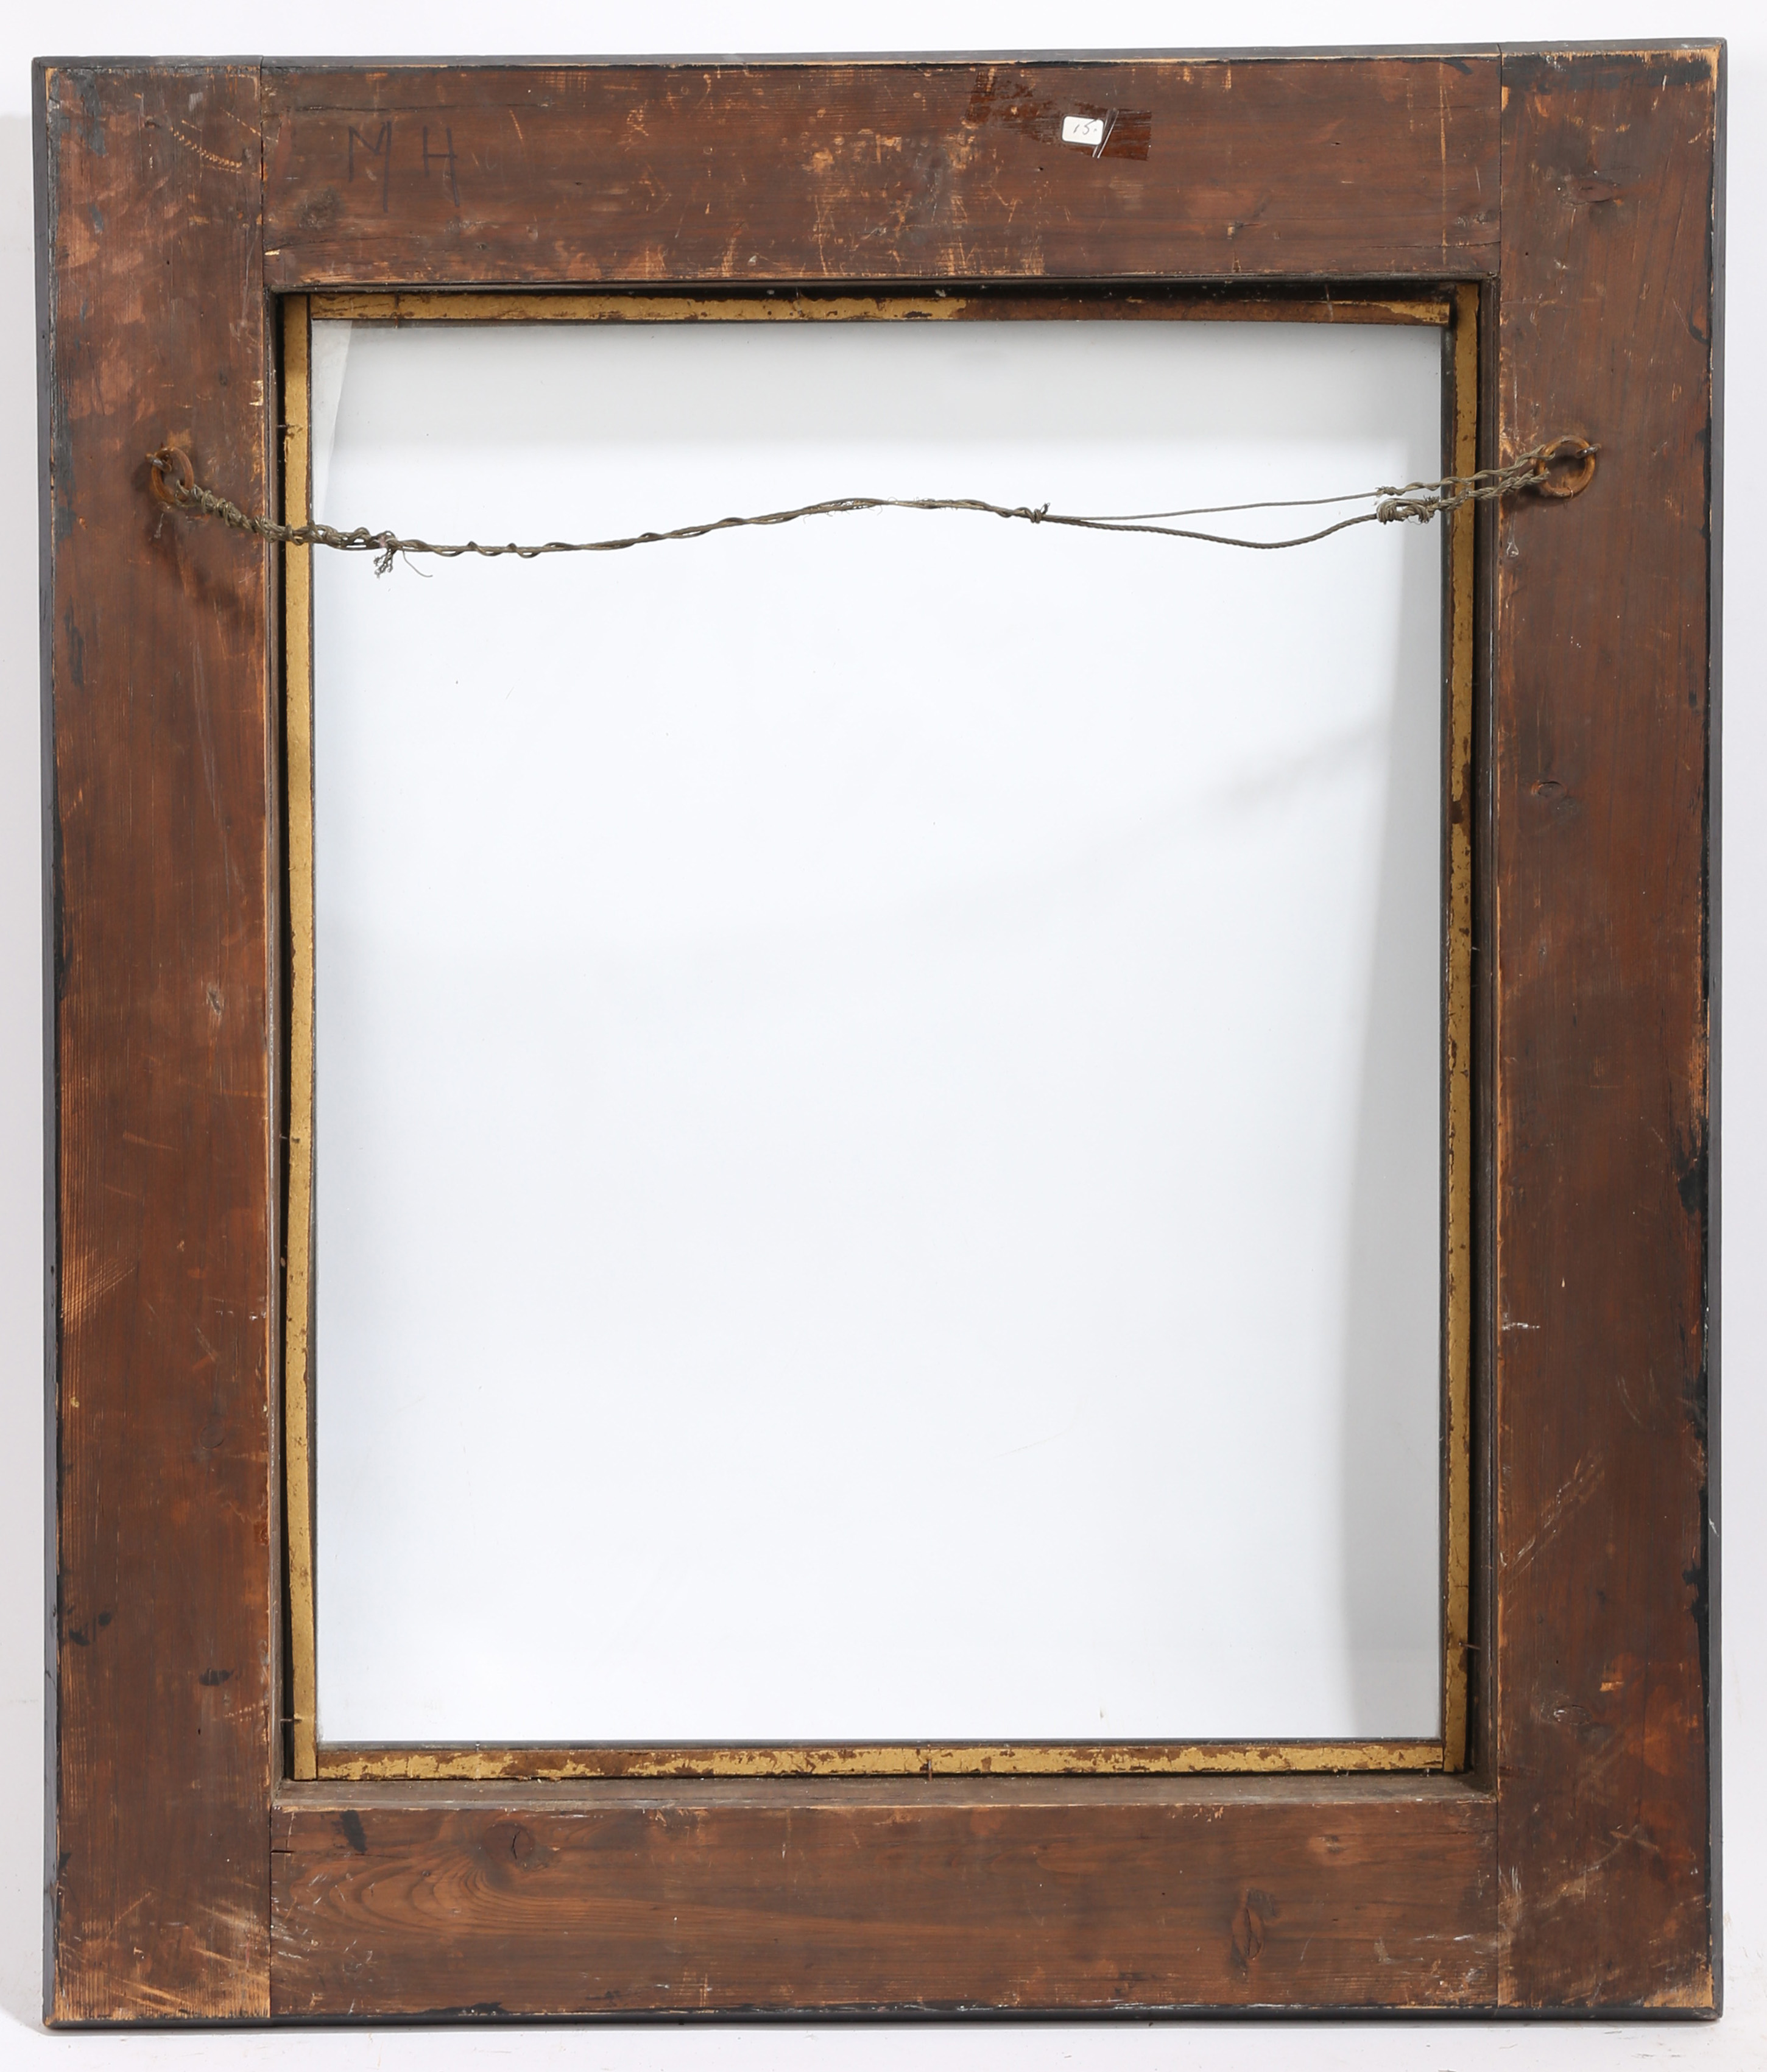 19th century faux tortoise shell picture frame, glazed - rebate size 23inx 18in - Image 2 of 3